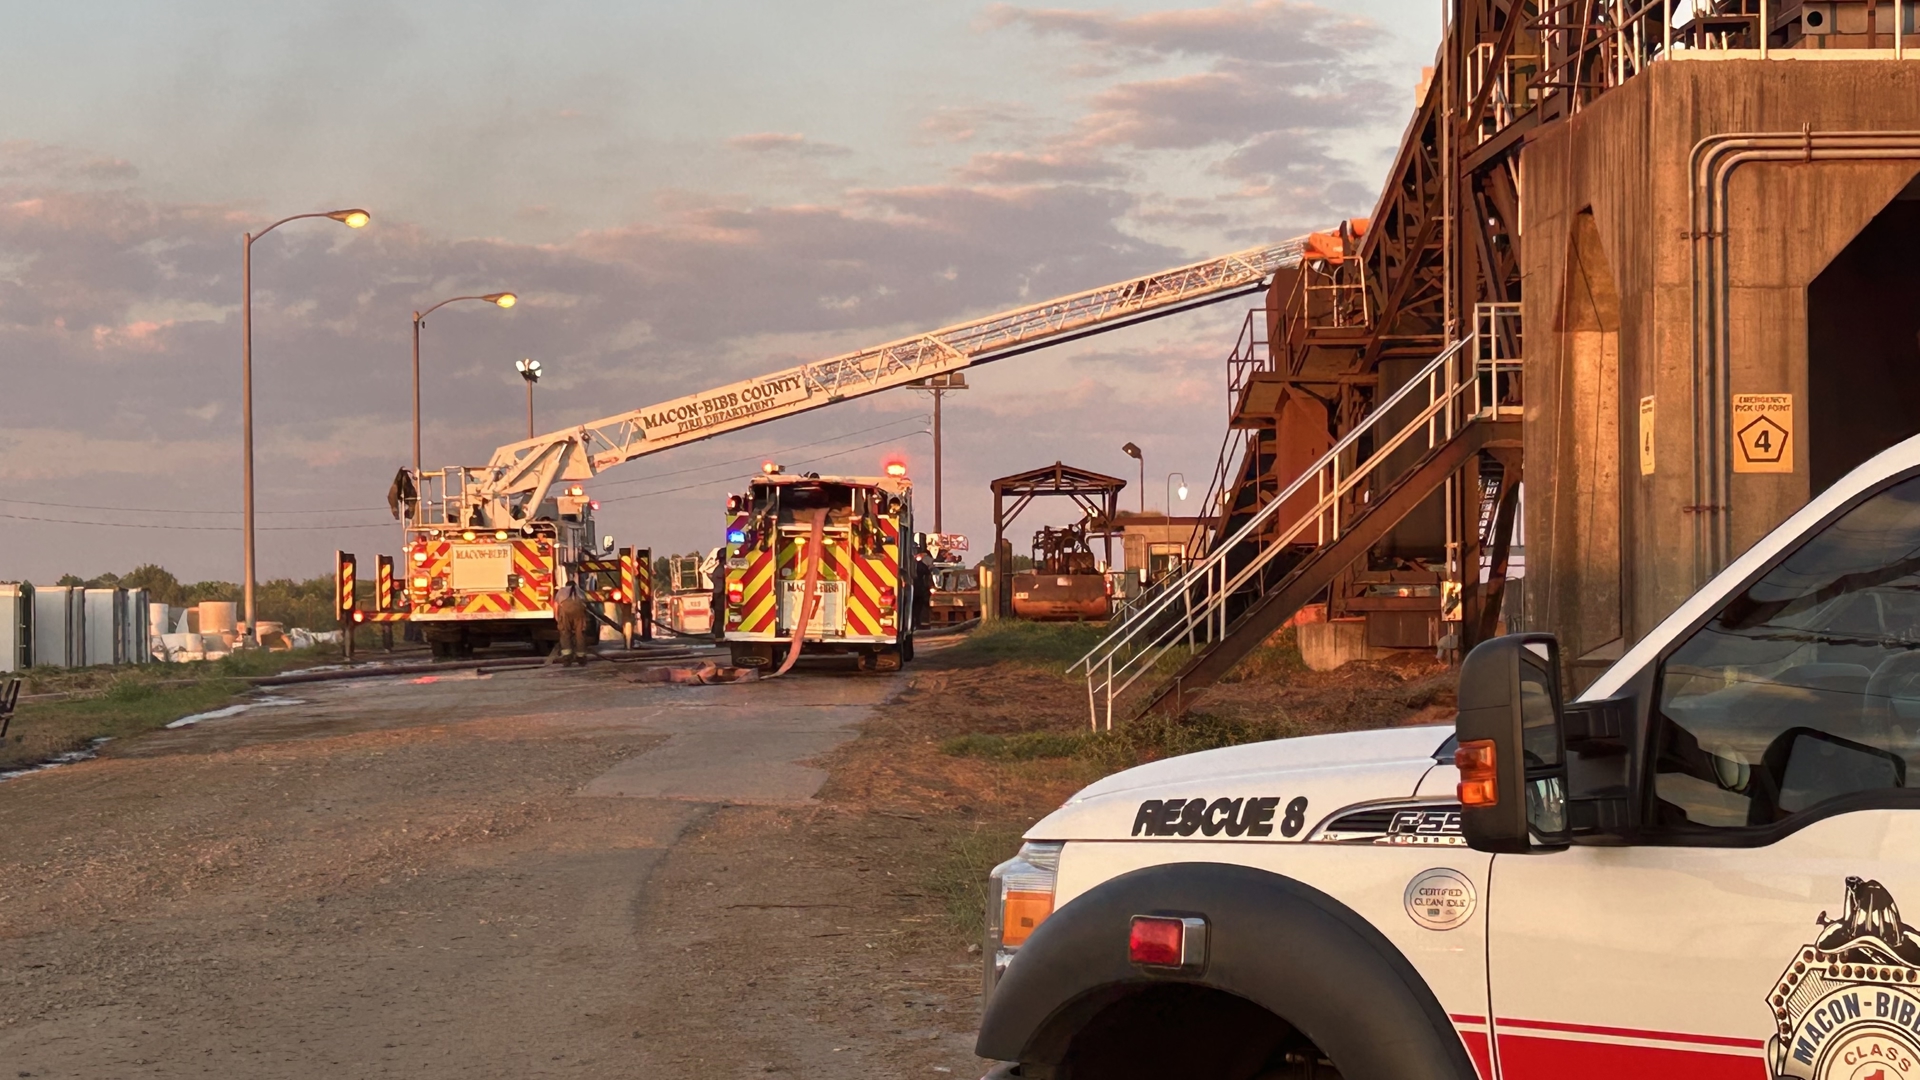 The fire was reported just before 8 p.m. at the Graphic Packaging paper plant, lead fire investigator Capt. Kyle Murray said.